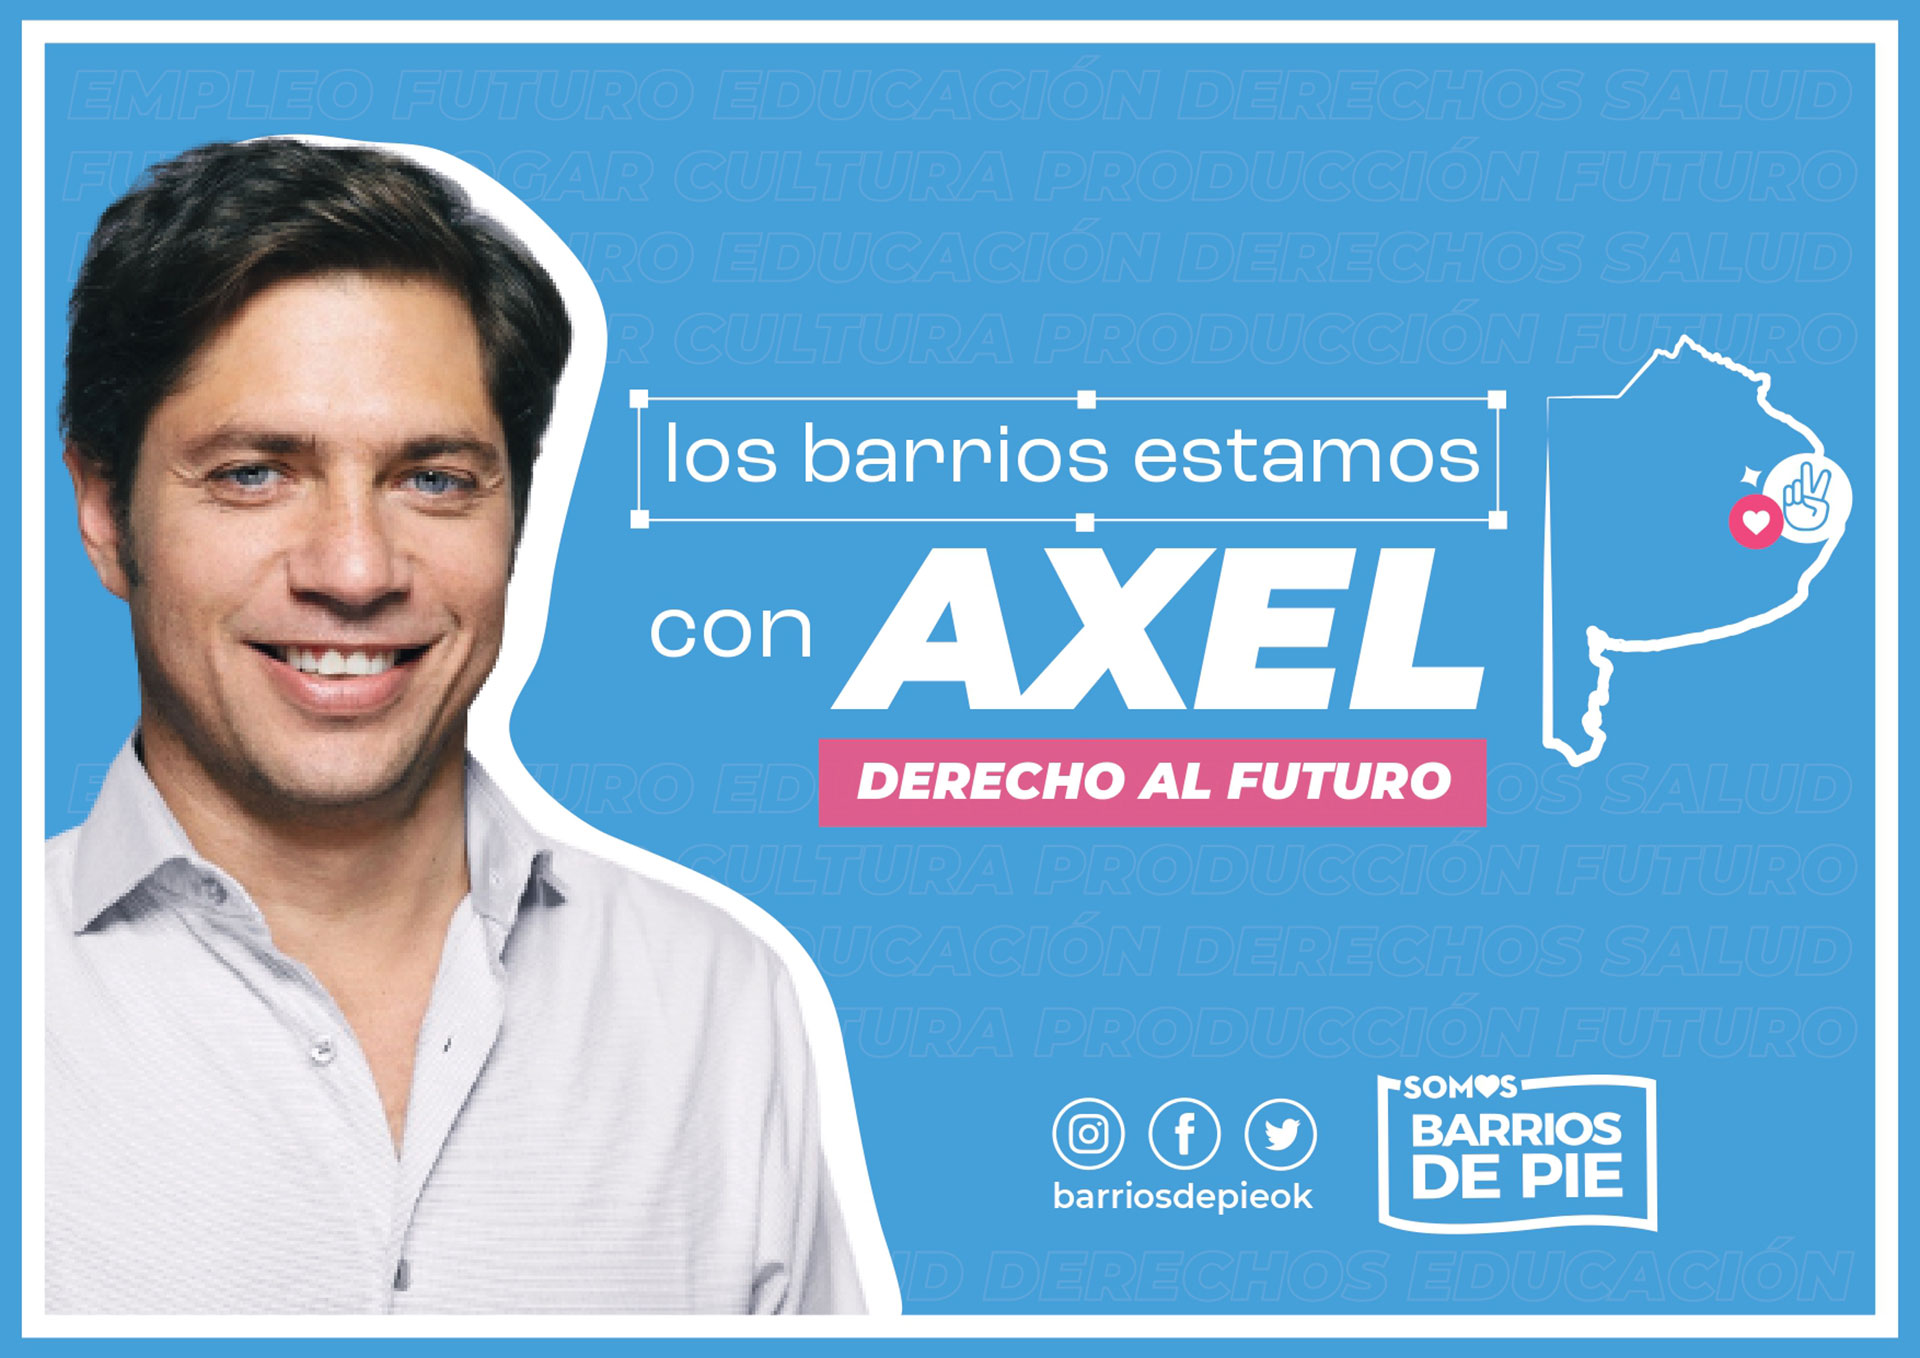 One of the posters of Somos Barrios de Pie in favor of the re-election of Axel Kicillof